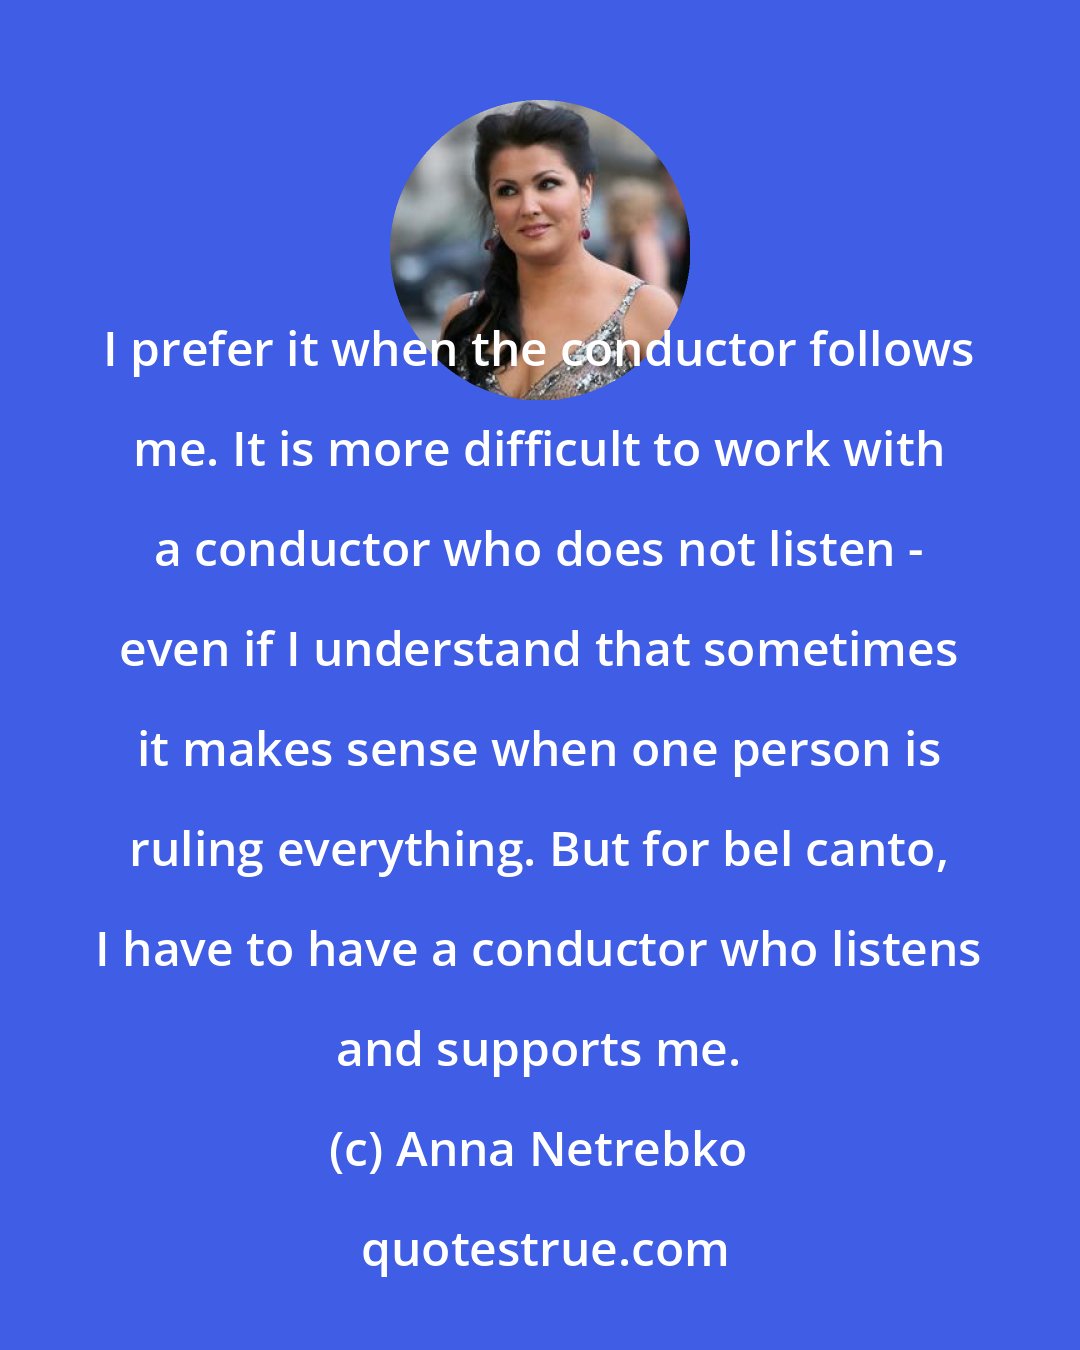 Anna Netrebko: I prefer it when the conductor follows me. It is more difficult to work with a conductor who does not listen - even if I understand that sometimes it makes sense when one person is ruling everything. But for bel canto, I have to have a conductor who listens and supports me.